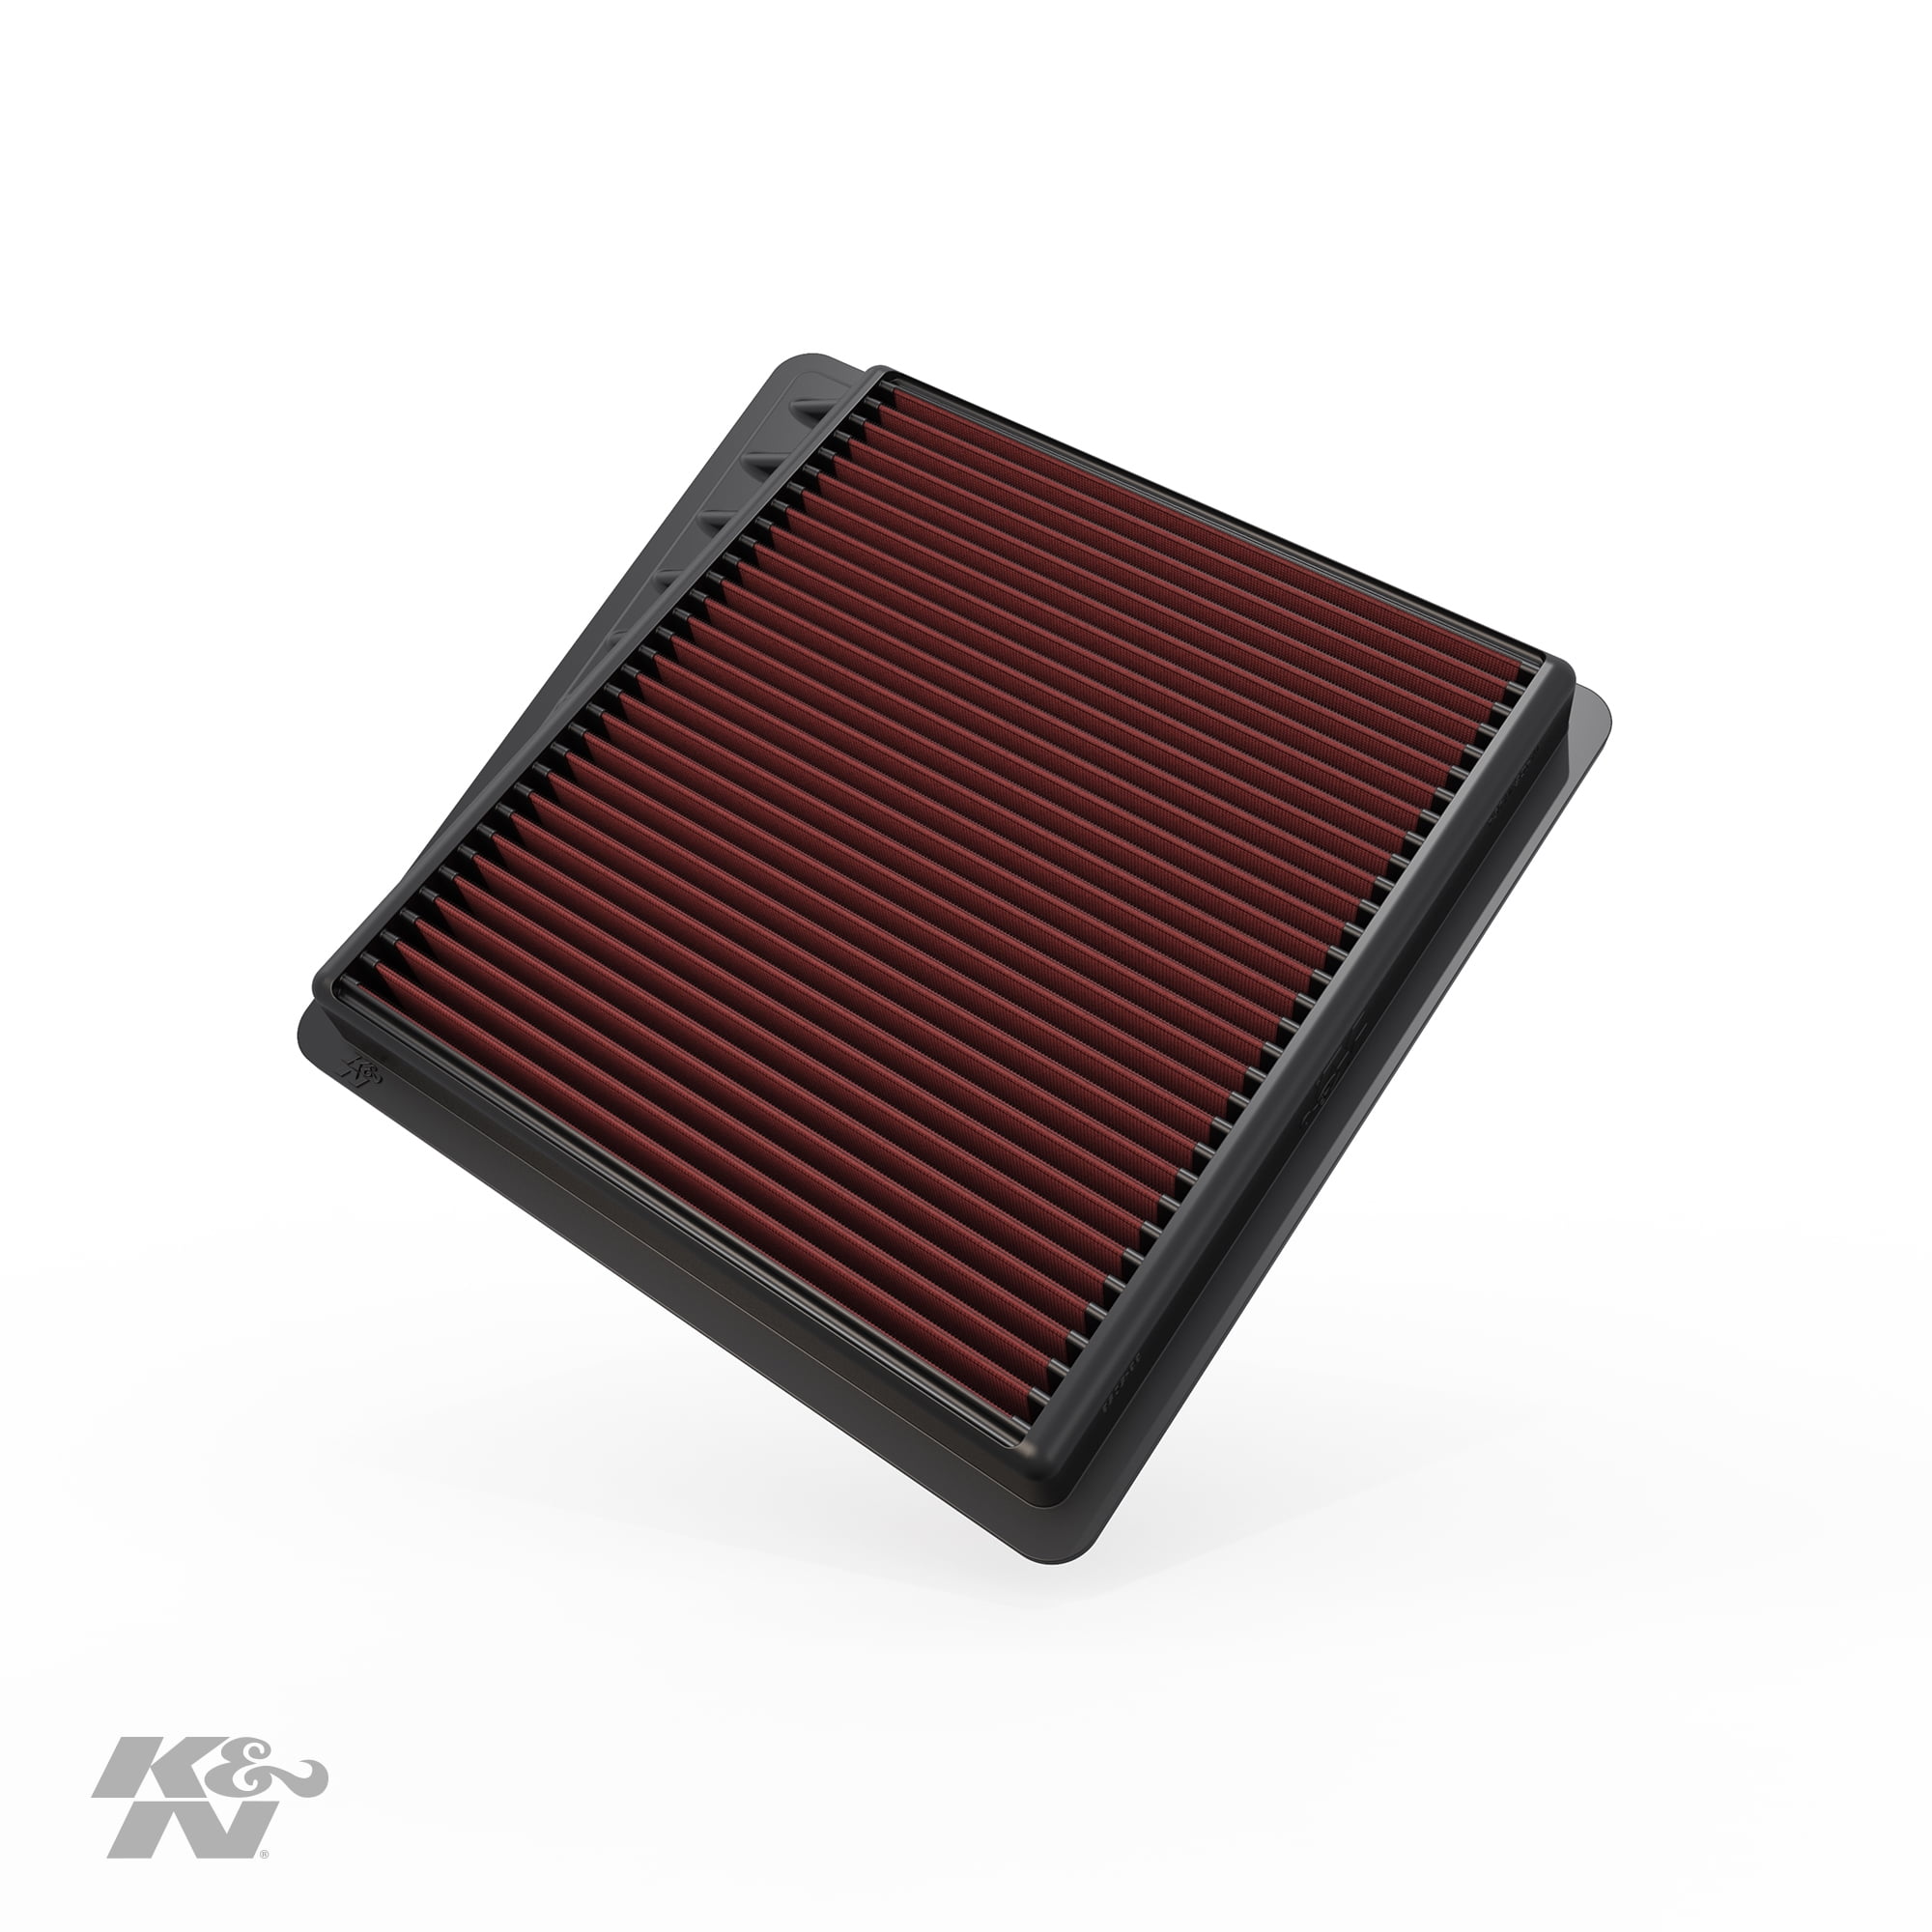 K&N Engine Air Filter: High Performance, Premium, Washable, Replacement Filter: 2016-2019 Nissan 2018 Nissan Titan Engine Air Filter Replacement